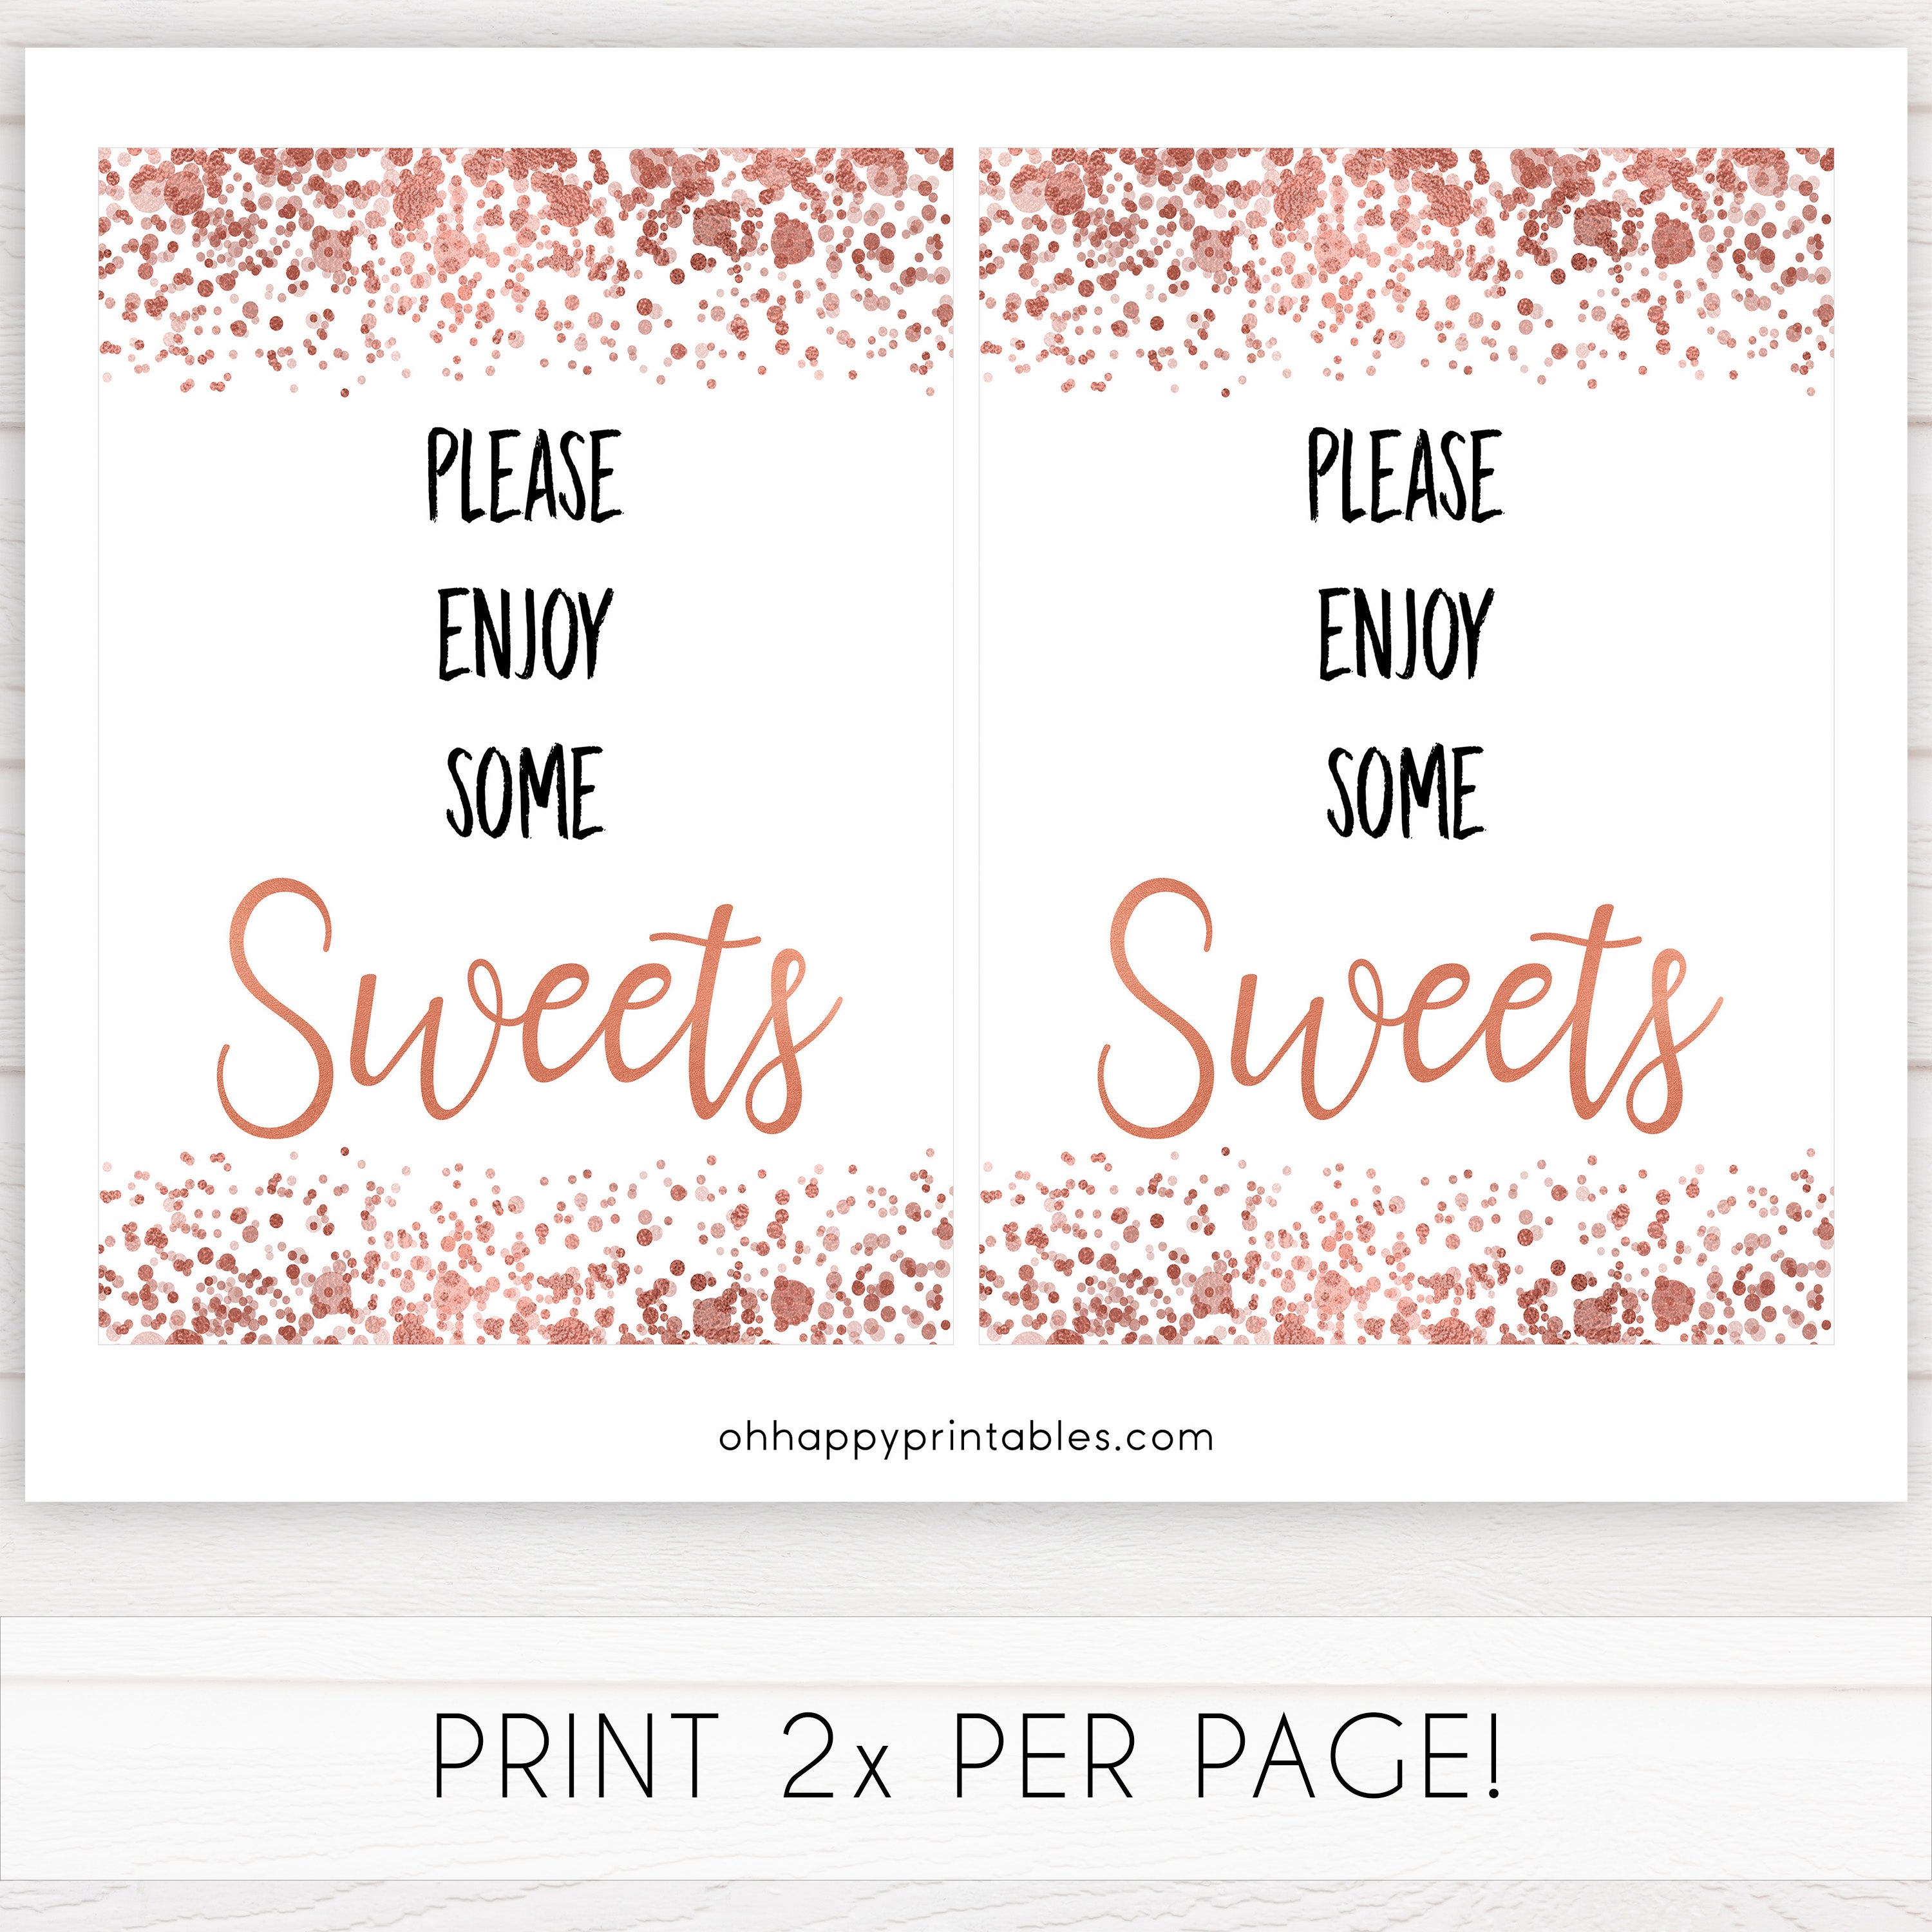 sweets baby table signs, sweets baby signs, Rose gold baby decor, printable baby table signs, printable baby decor, rose gold table signs, fun baby signs, rose gold fun baby table signs